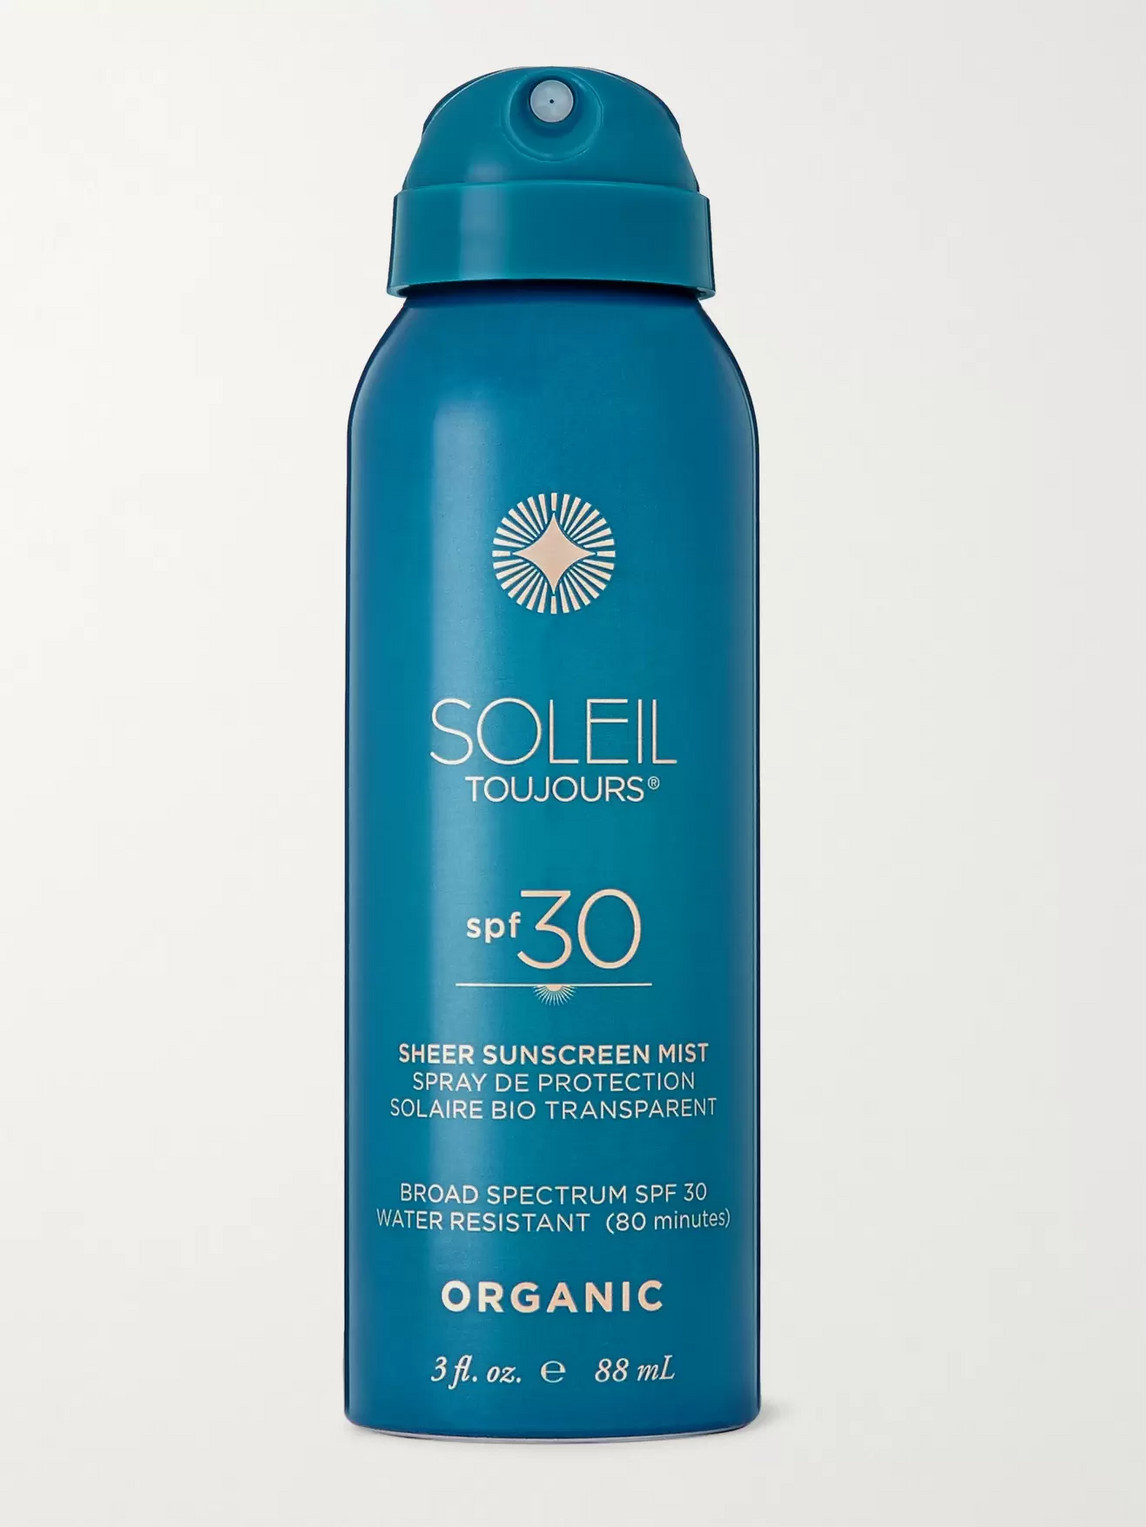 Soleil Toujours Organic Sheer Sunscreen Mist Spf30, 88ml In Colorless